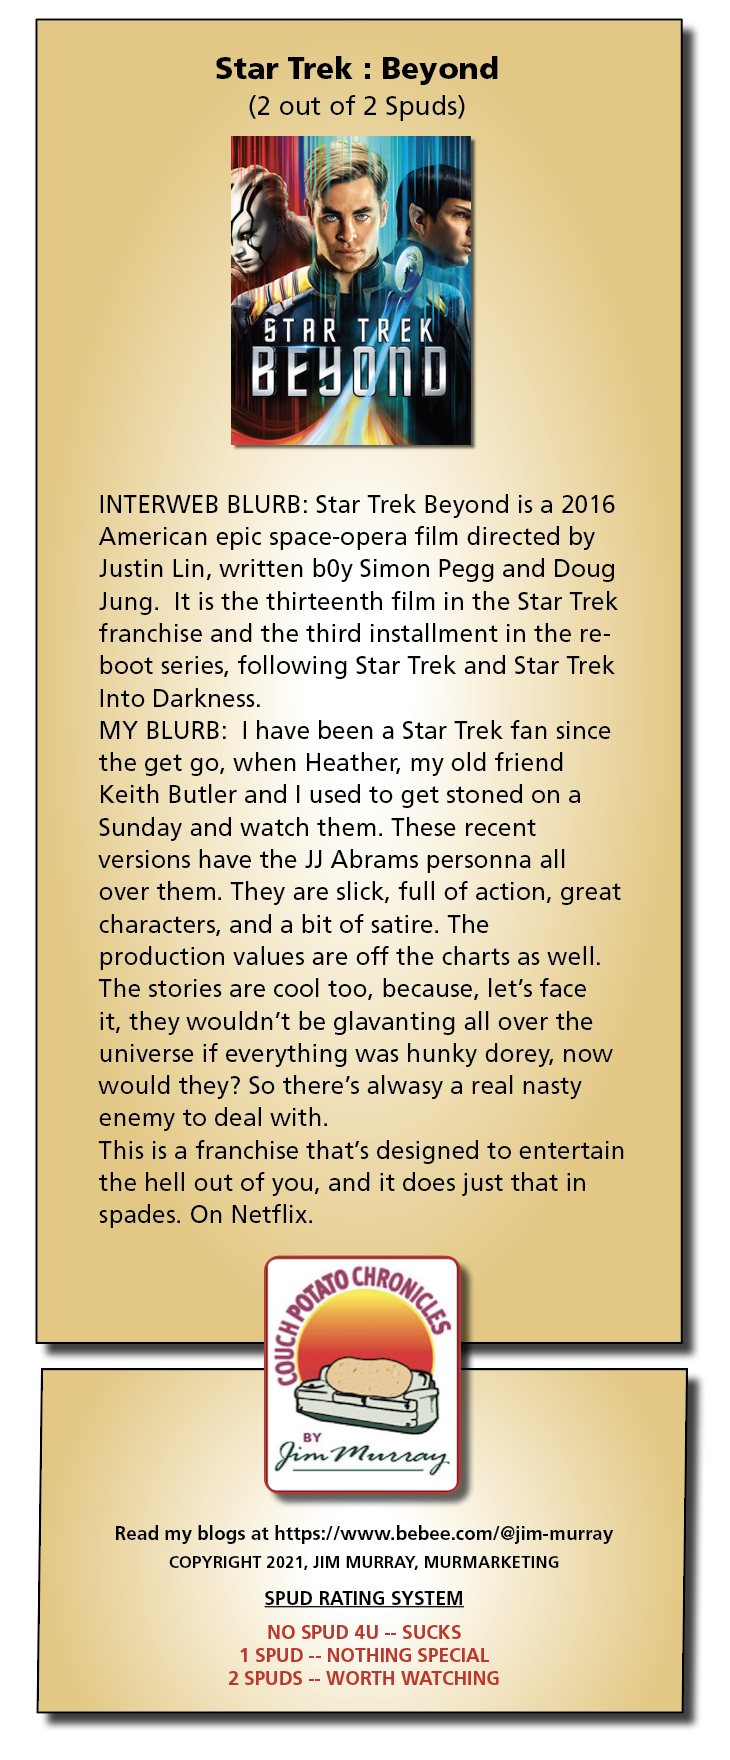 Star Trek : Beyond
(2 out of 2 Spuds)

INTERWEB BLURB: Star Trek Beyond is a 2016
American epic space-opera film directed by
Justin Lin, written bOy Simon Pegg and Doug
Jung. It is the thirteenth film in the Star Trek
franchise and the third installment in the re-
boot series, following Star Trek and Star Trek
Into Darkness.

MY BLURB: | have been a Star Trek fan since
the get go, when Heather, my old friend
Keith Butler and | used to get stoned on a
Sunday and watch them. These recent
versions have the JJ Abrams personna all
over them. They are slick, full of action, great
characters, and a bit of satire. The
production values are off the charts as well.
The stories are cool too, because, let's face
it, they wouldnt be glavanting all over the
universe if everything was hunky dorey, now
would they? So there's alwasy a real nasty
enemy to deal with.

This is a franchise that's designed to entertain
the hell out of you, and it does just that in
spades. On Netflix.

& CHRgy,

&

sy

von Per toe

q

Read my blogs at https:/ /www.bebee.com/@jim-murray
COPYRIGHT 2021, JIM MURRAY, MURMARKETING
SPUD RATING SYSTEM

NO SPUD 4U -- SUCKS
1 SPUD -- NOTHING SPECIAL
2 SPUDS -- WORTH WATCHING